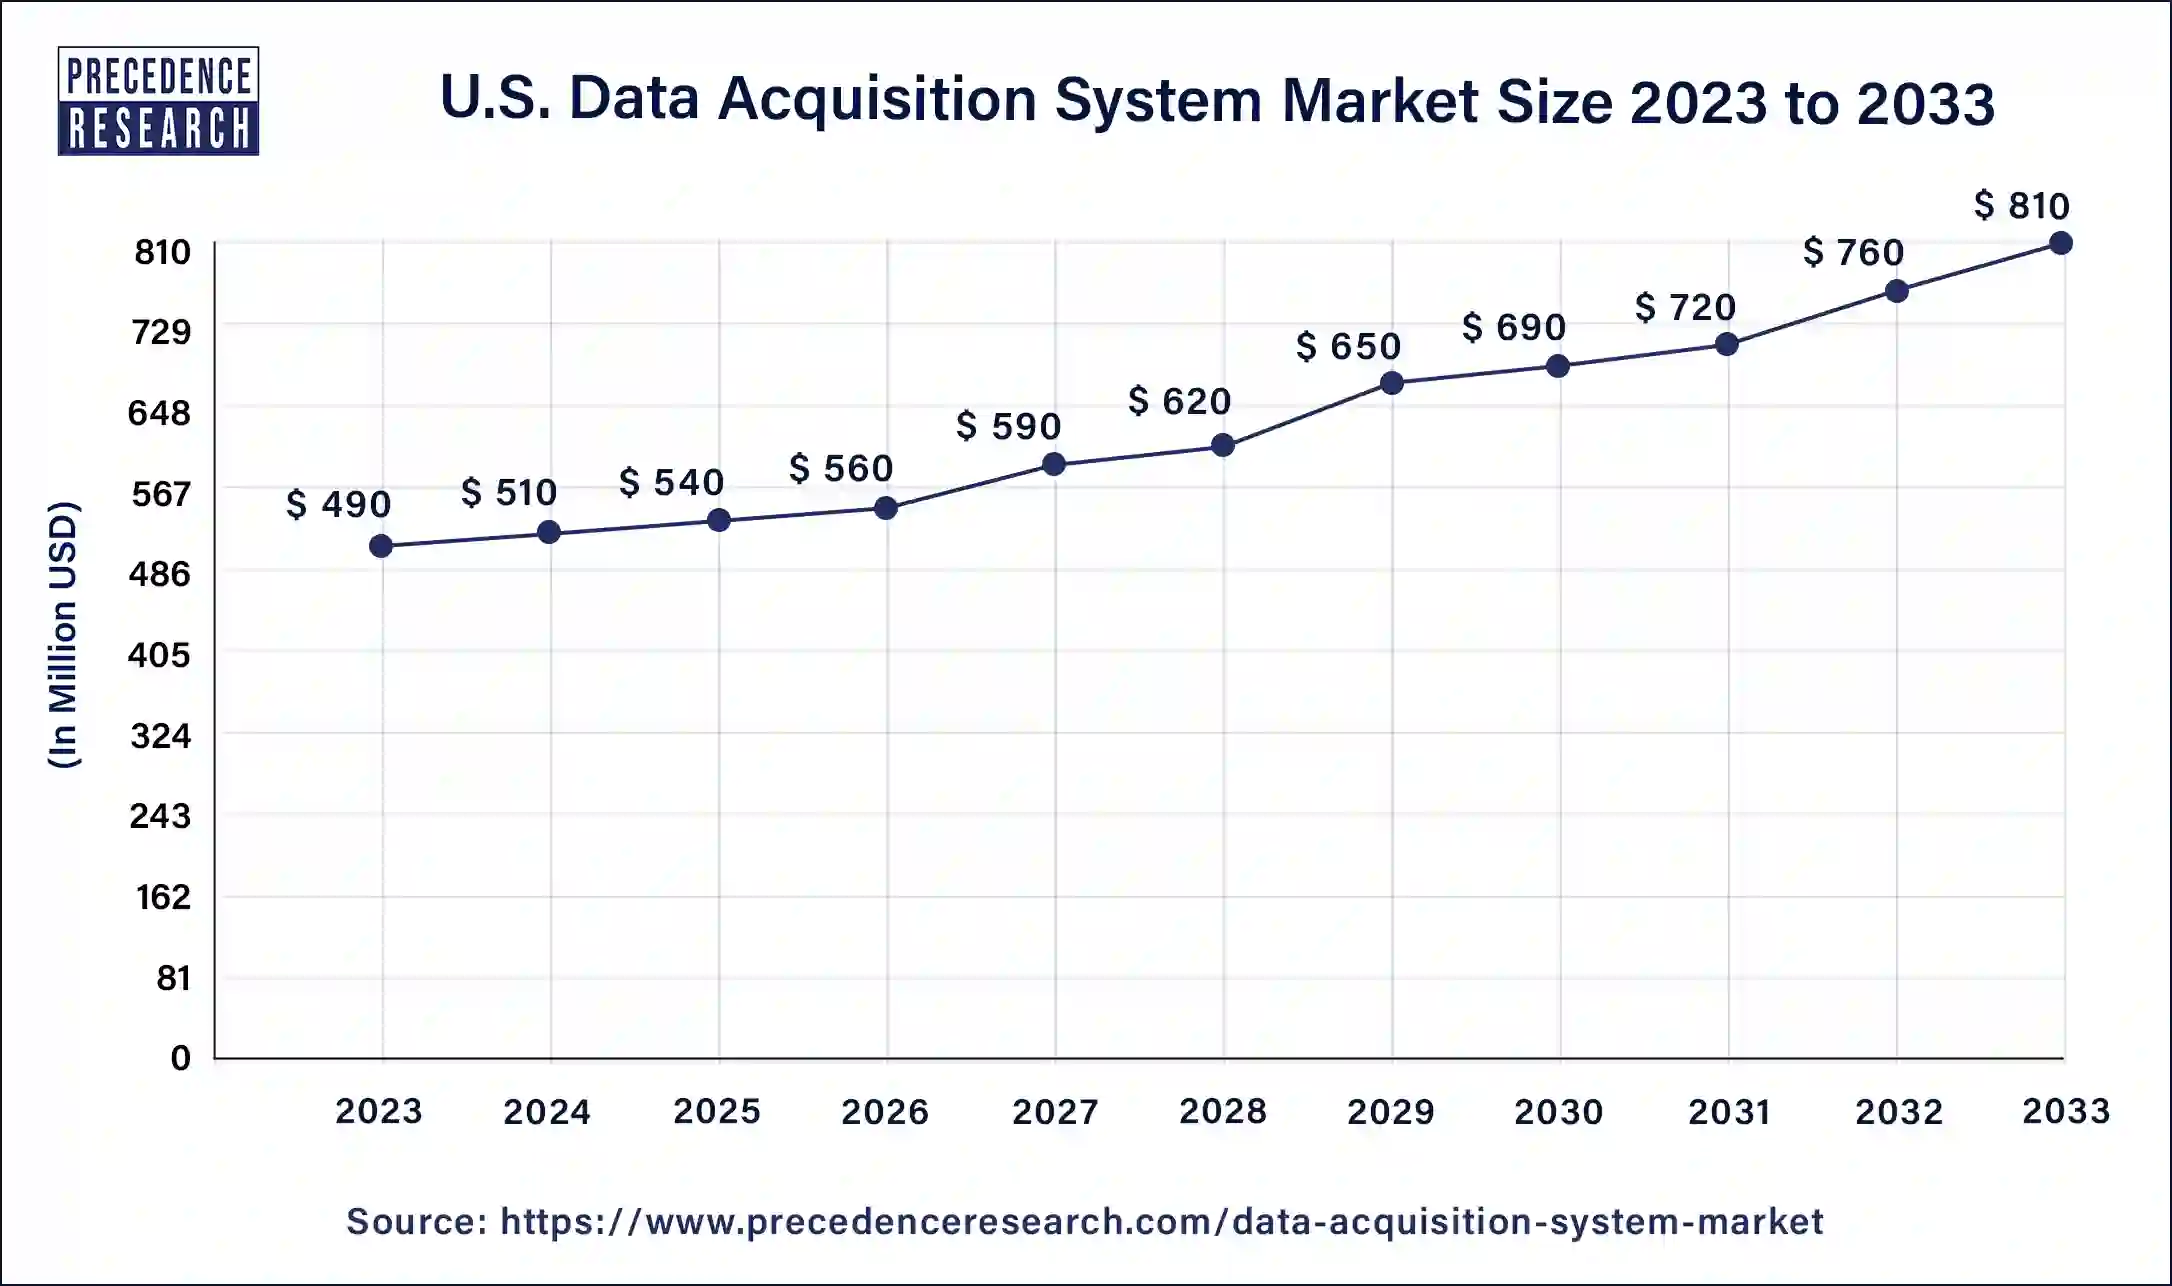 U.S. Data Acquisition System Market Size 2024 to 2033